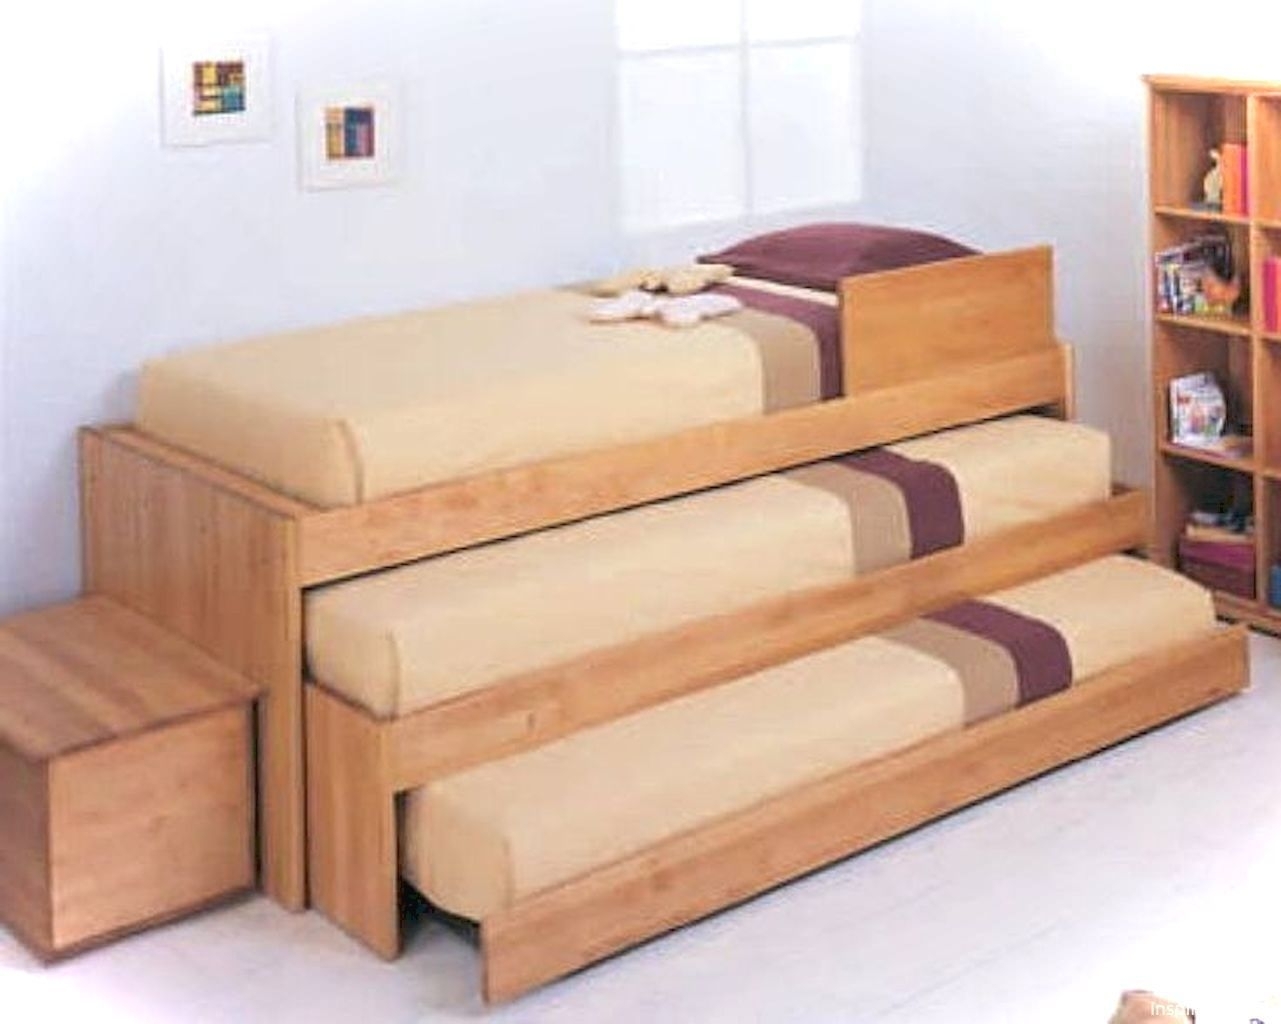 Rooms To Go Kids Trundle Bed Cheaper Than Retail Price Buy Clothing Accessories And Lifestyle Products For Women Men